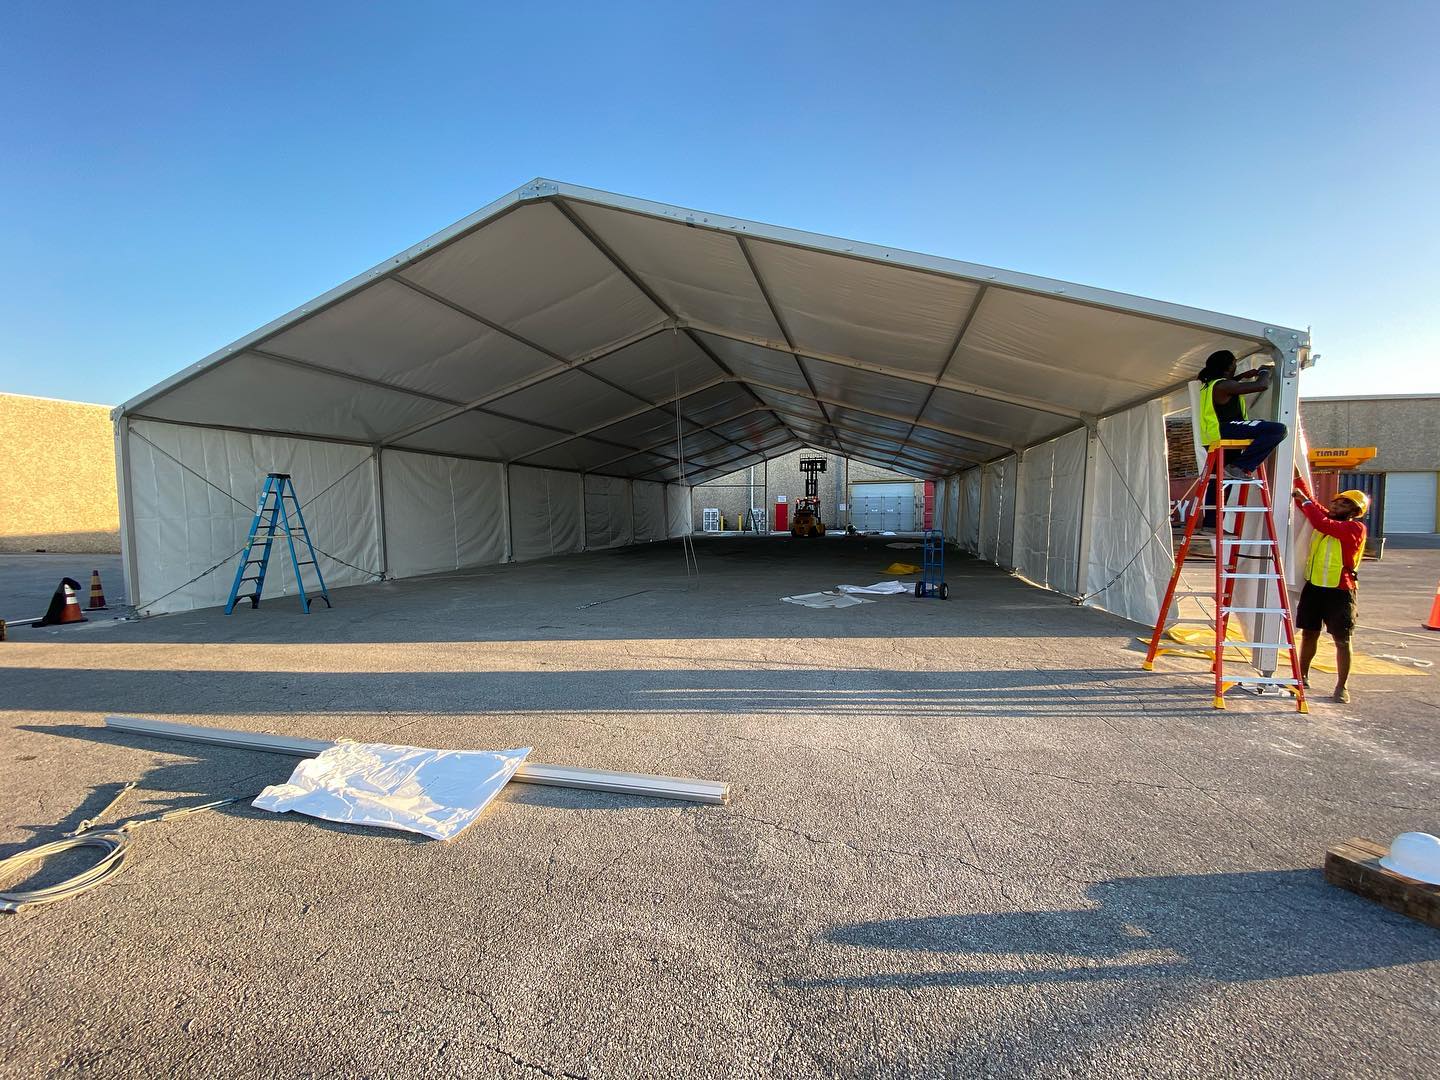 Construction team members set up a large, open, white tent on pavement.